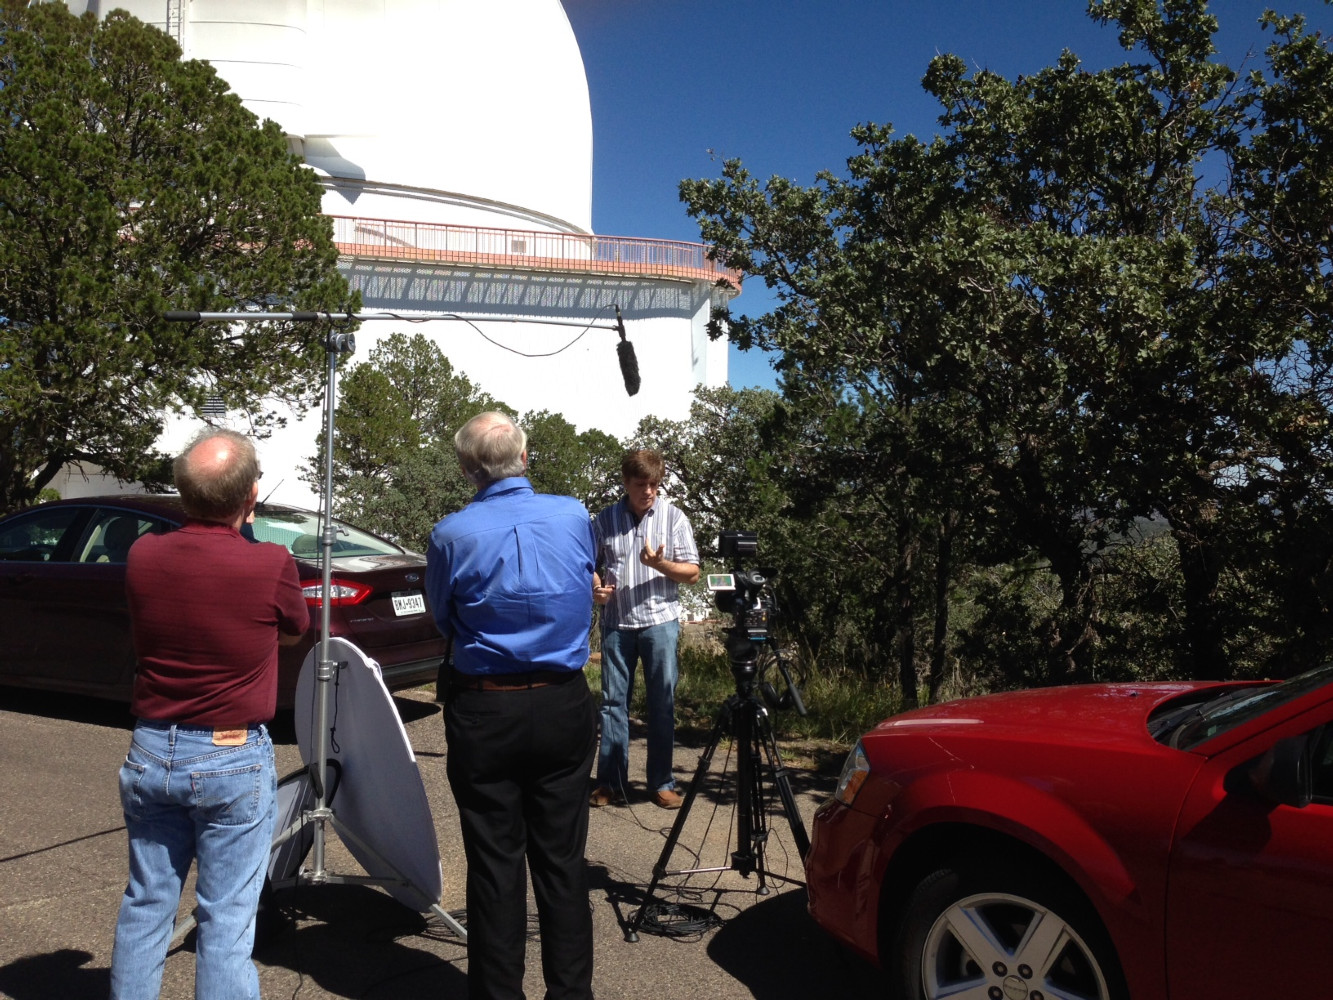 On location at the McDonald Observatory in west Texas.